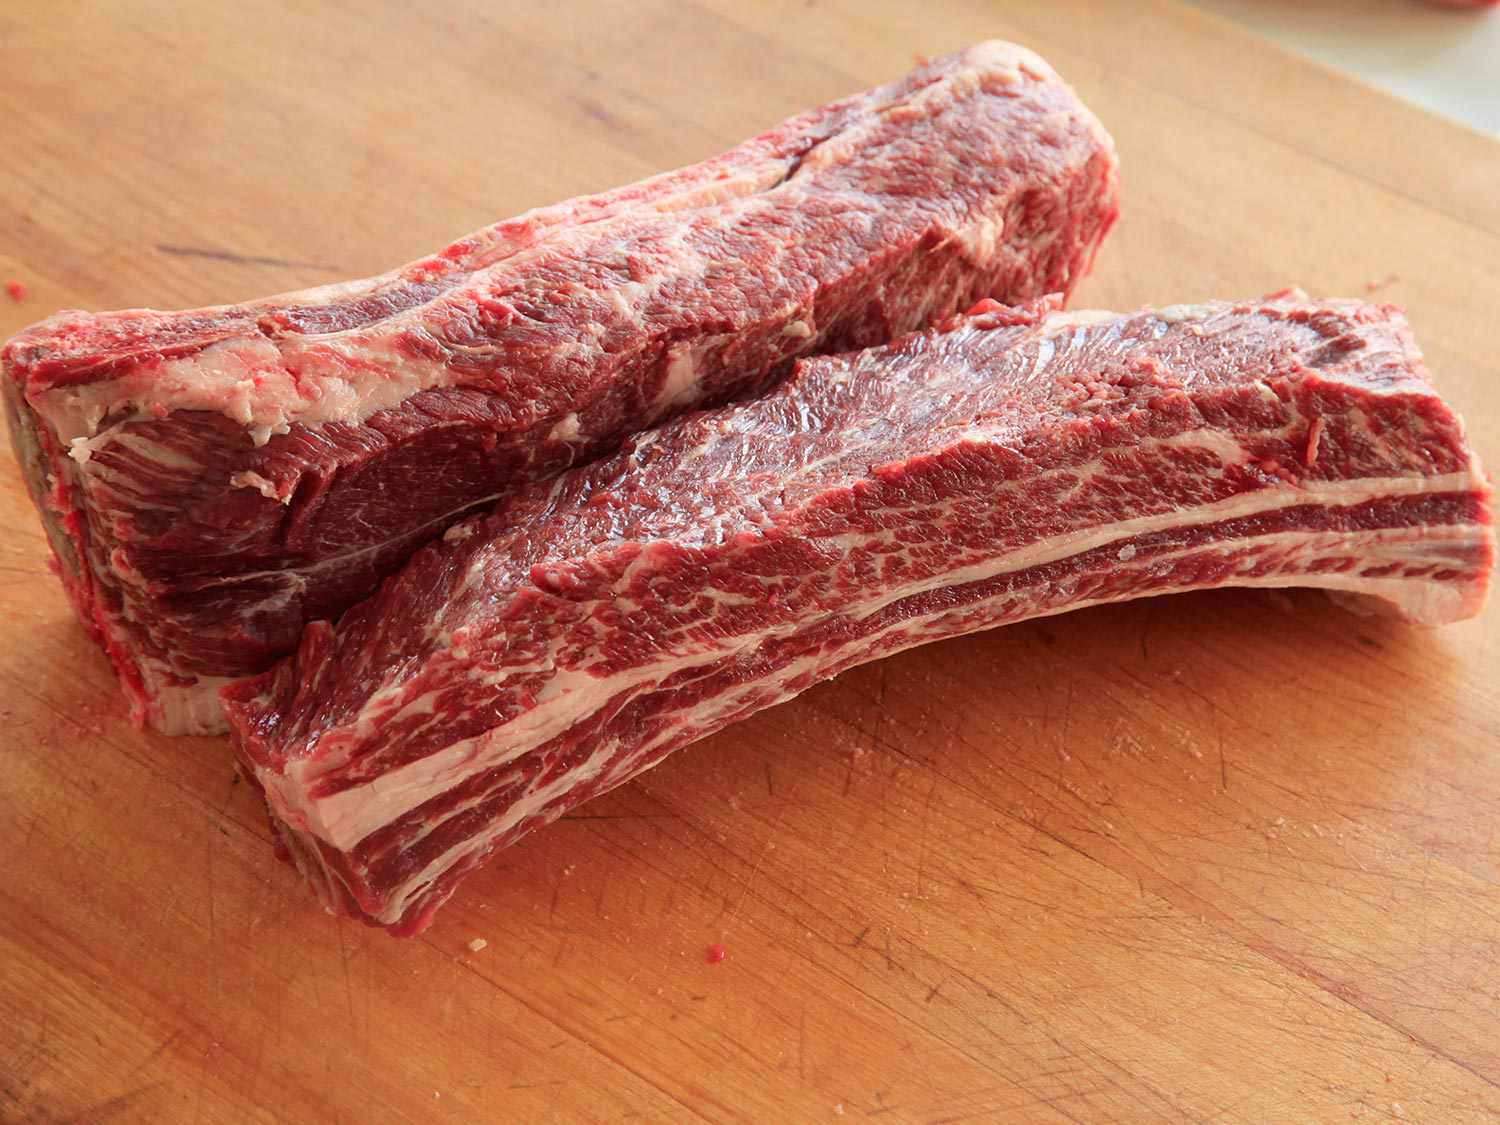 Raw short ribs on a wooden surface